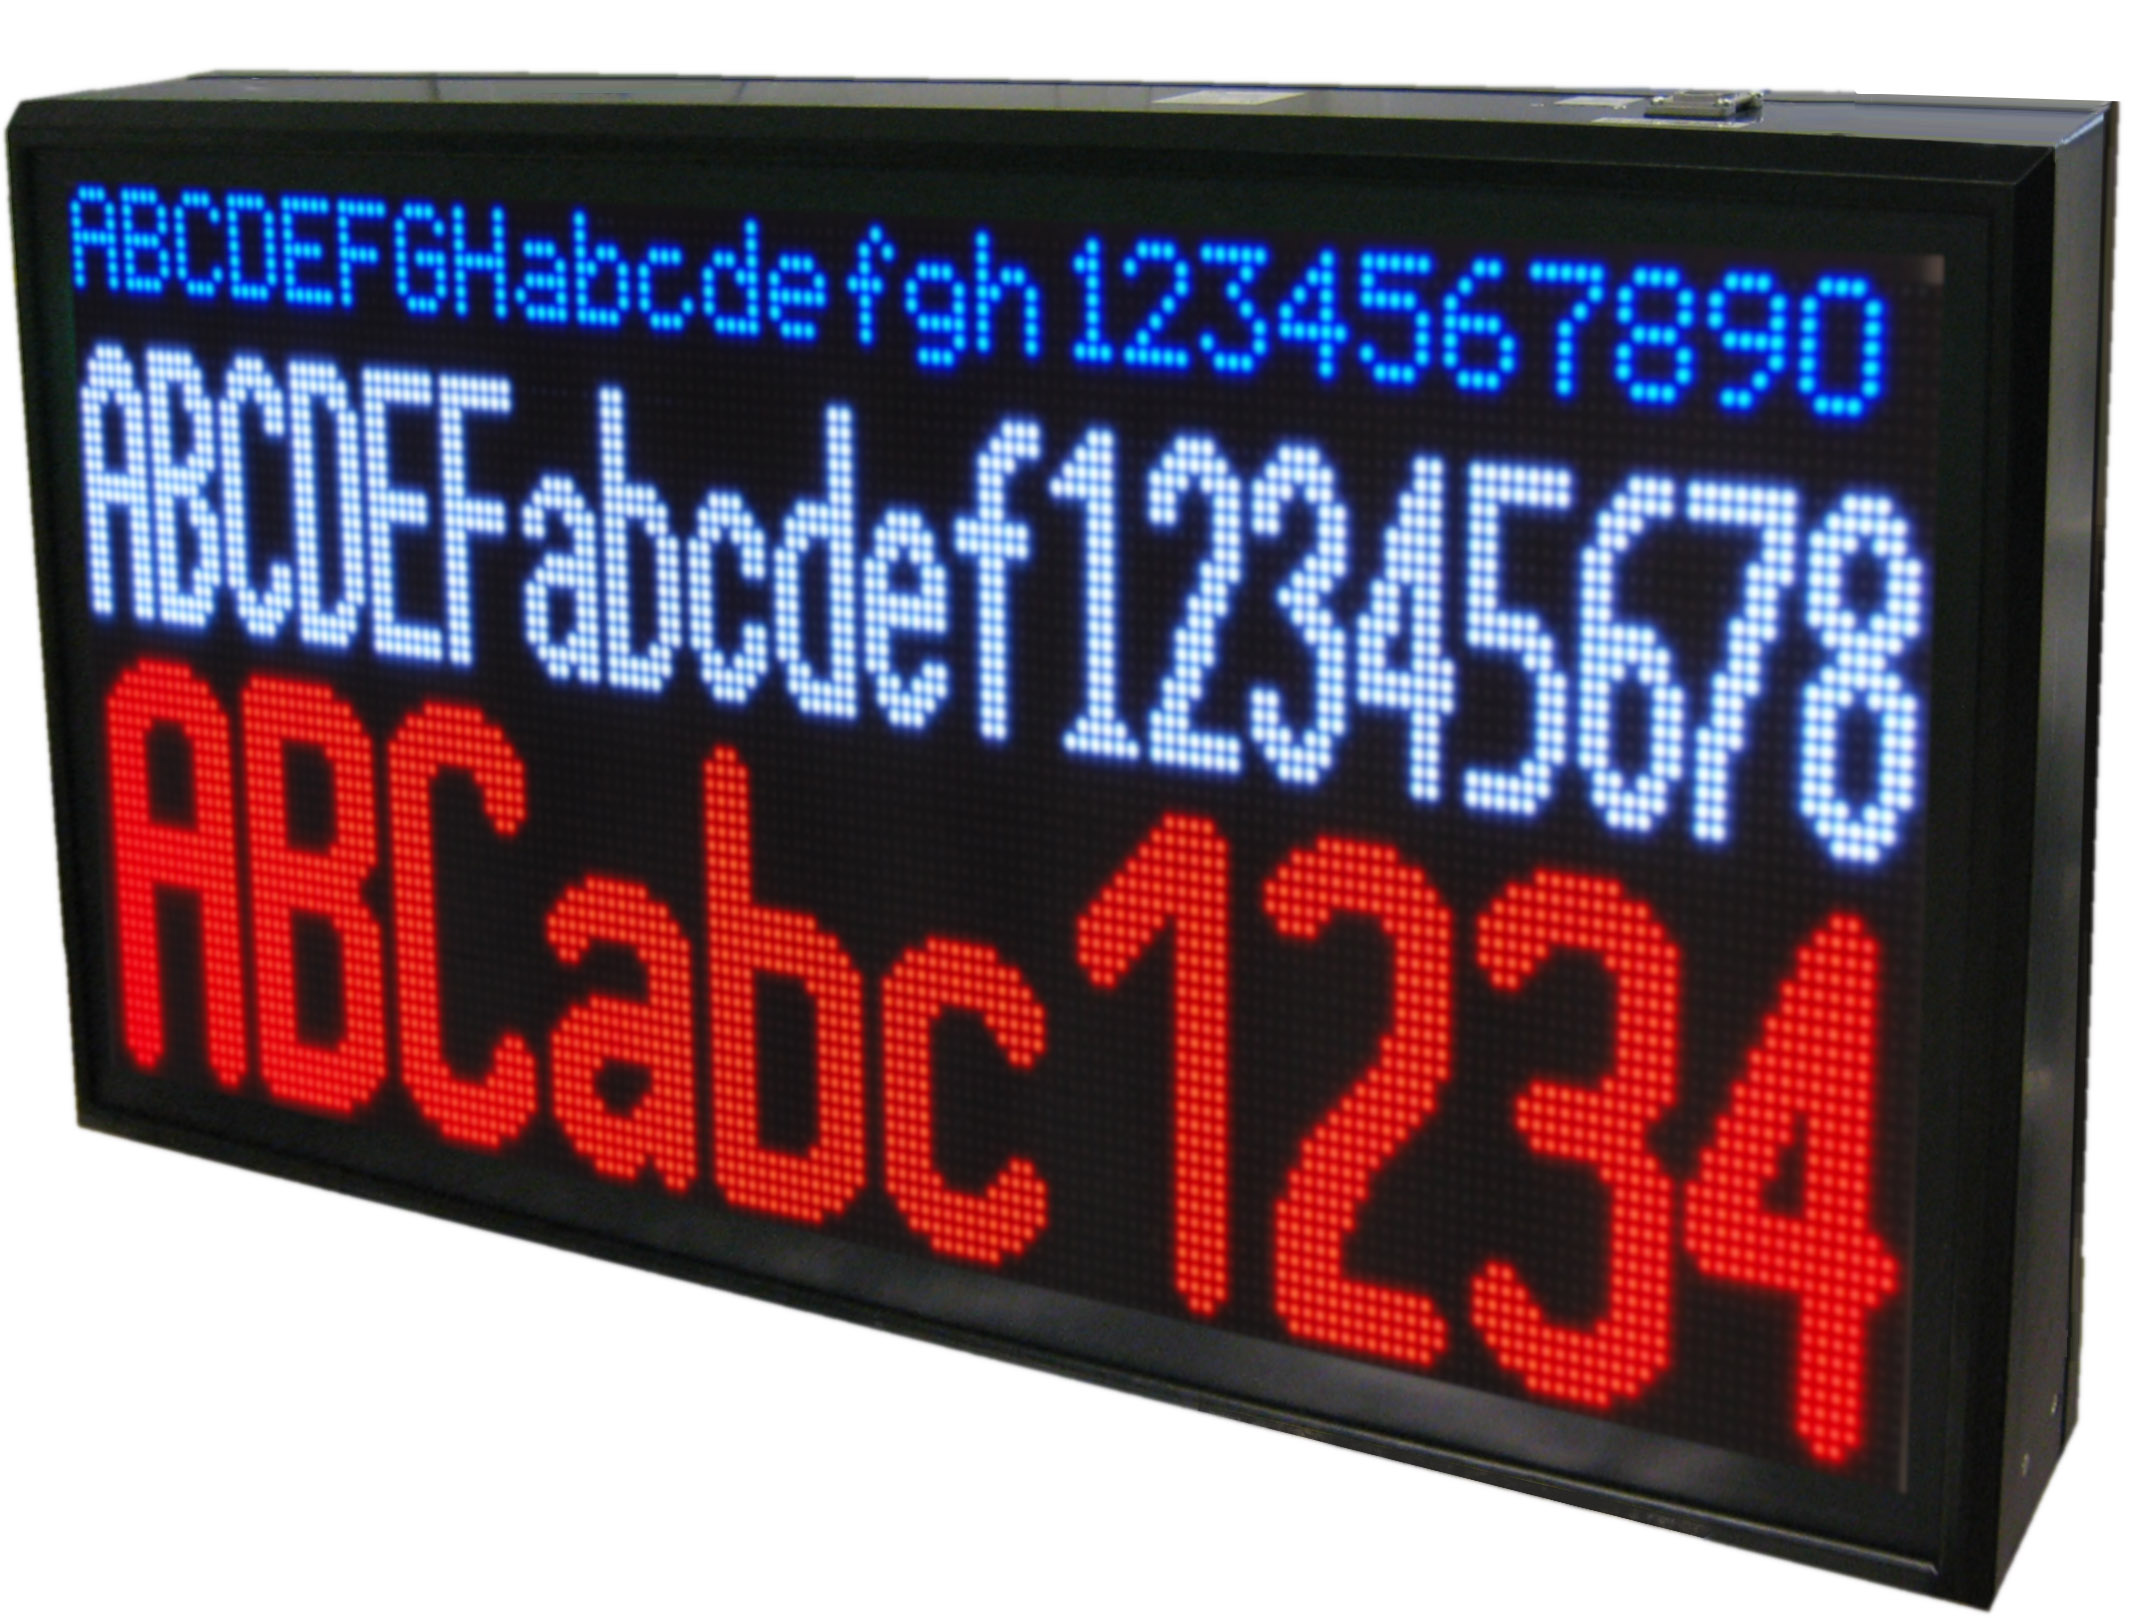 Multi-line alphanumeric large displays, 16 colors, indoor/outdoor, modular design, numerous different sizes available